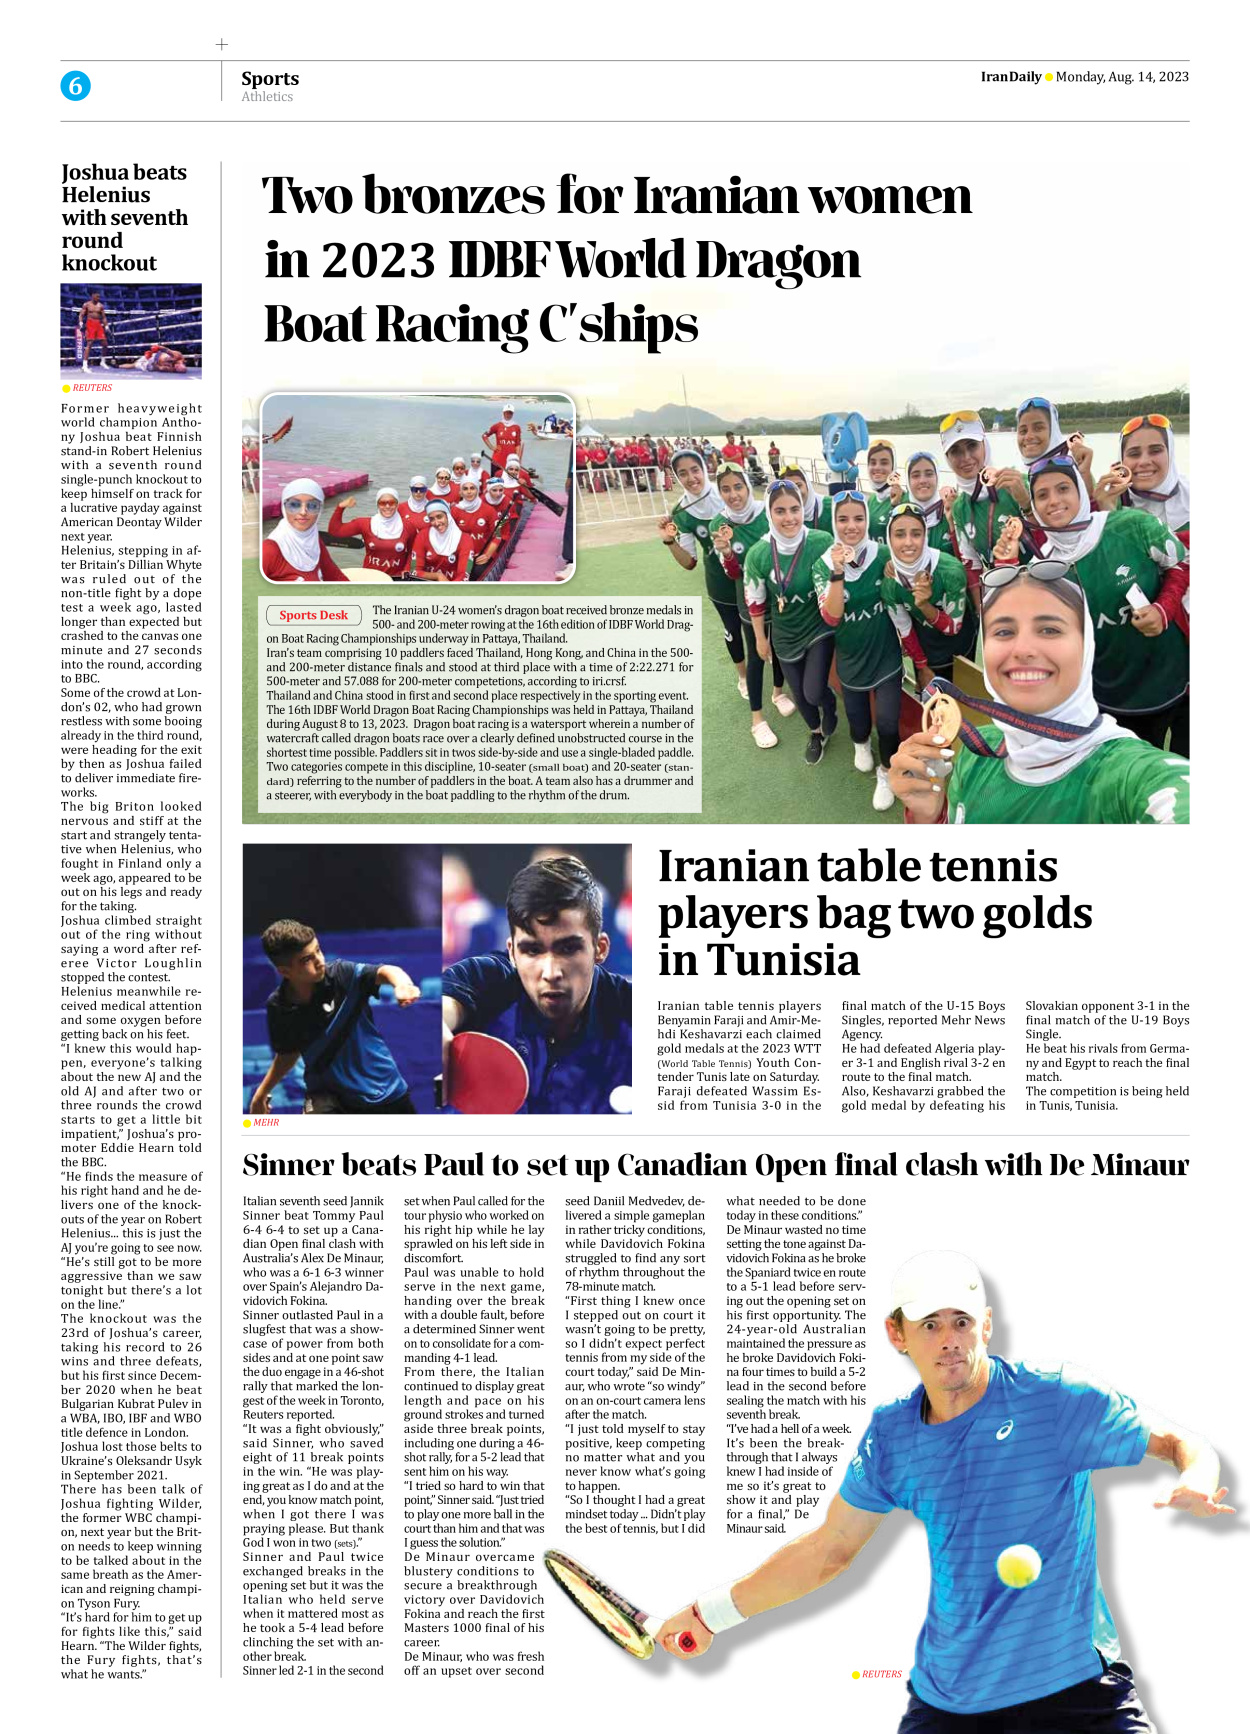 Iran Daily - Number Seven Thousand Three Hundred and Sixty Two - 14 August 2023 - Page 6